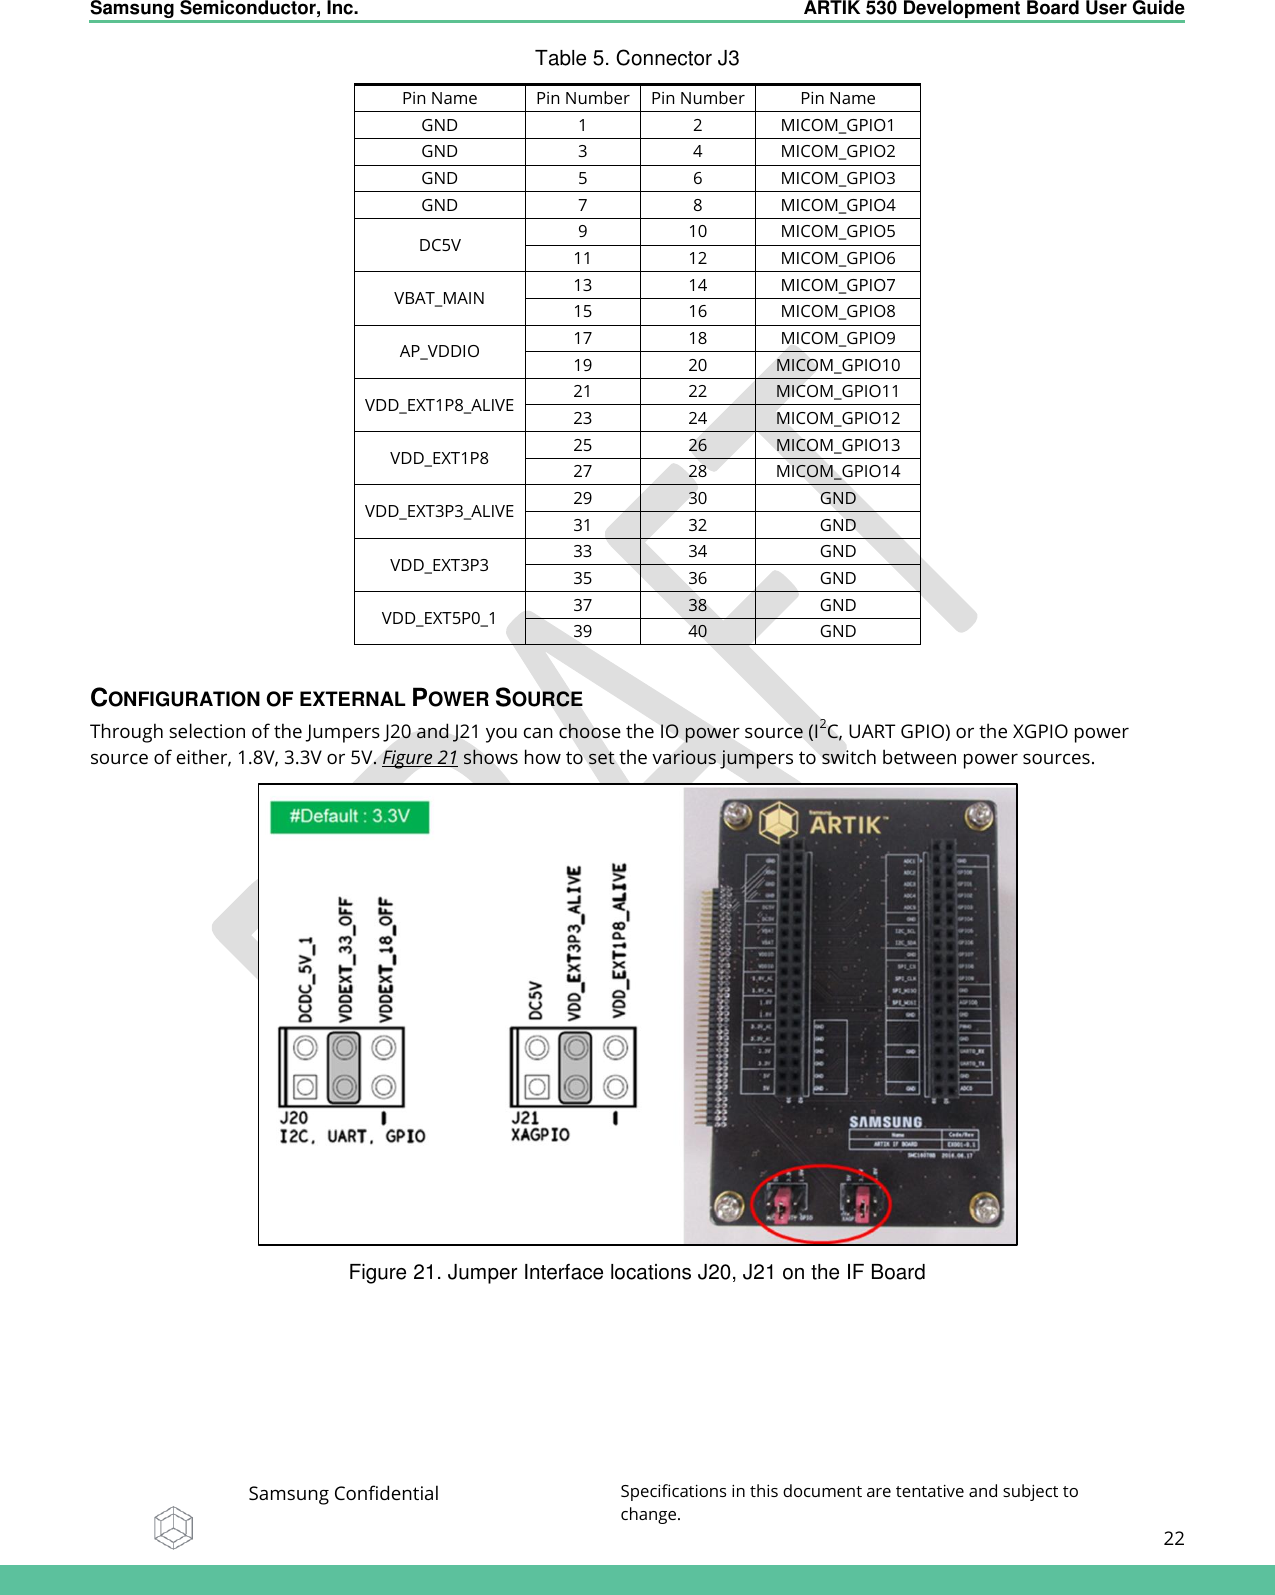    Samsung Semiconductor, Inc.  ARTIK 530 Development Board User Guide   Samsung Confidential Specifications in this document are tentative and subject to change.  22   Table 5. Connector J3 Pin Name Pin Number Pin Number Pin Name GND 1 2 MICOM_GPIO1 GND 3 4 MICOM_GPIO2 GND 5 6 MICOM_GPIO3 GND 7 8 MICOM_GPIO4 DC5V 9 10 MICOM_GPIO5 11 12 MICOM_GPIO6 VBAT_MAIN 13 14 MICOM_GPIO7 15 16 MICOM_GPIO8 AP_VDDIO 17 18 MICOM_GPIO9 19 20 MICOM_GPIO10 VDD_EXT1P8_ALIVE 21 22 MICOM_GPIO11 23 24 MICOM_GPIO12 VDD_EXT1P8 25 26 MICOM_GPIO13 27 28 MICOM_GPIO14 VDD_EXT3P3_ALIVE 29 30 GND 31 32 GND VDD_EXT3P3 33 34 GND 35 36 GND VDD_EXT5P0_1 37 38 GND 39 40 GND  CONFIGURATION OF EXTERNAL POWER SOURCE Through selection of the Jumpers J20 and J21 you can choose the IO power source (I2C, UART GPIO) or the XGPIO power source of either, 1.8V, 3.3V or 5V. Figure 21 shows how to set the various jumpers to switch between power sources.  Figure 21. Jumper Interface locations J20, J21 on the IF Board 